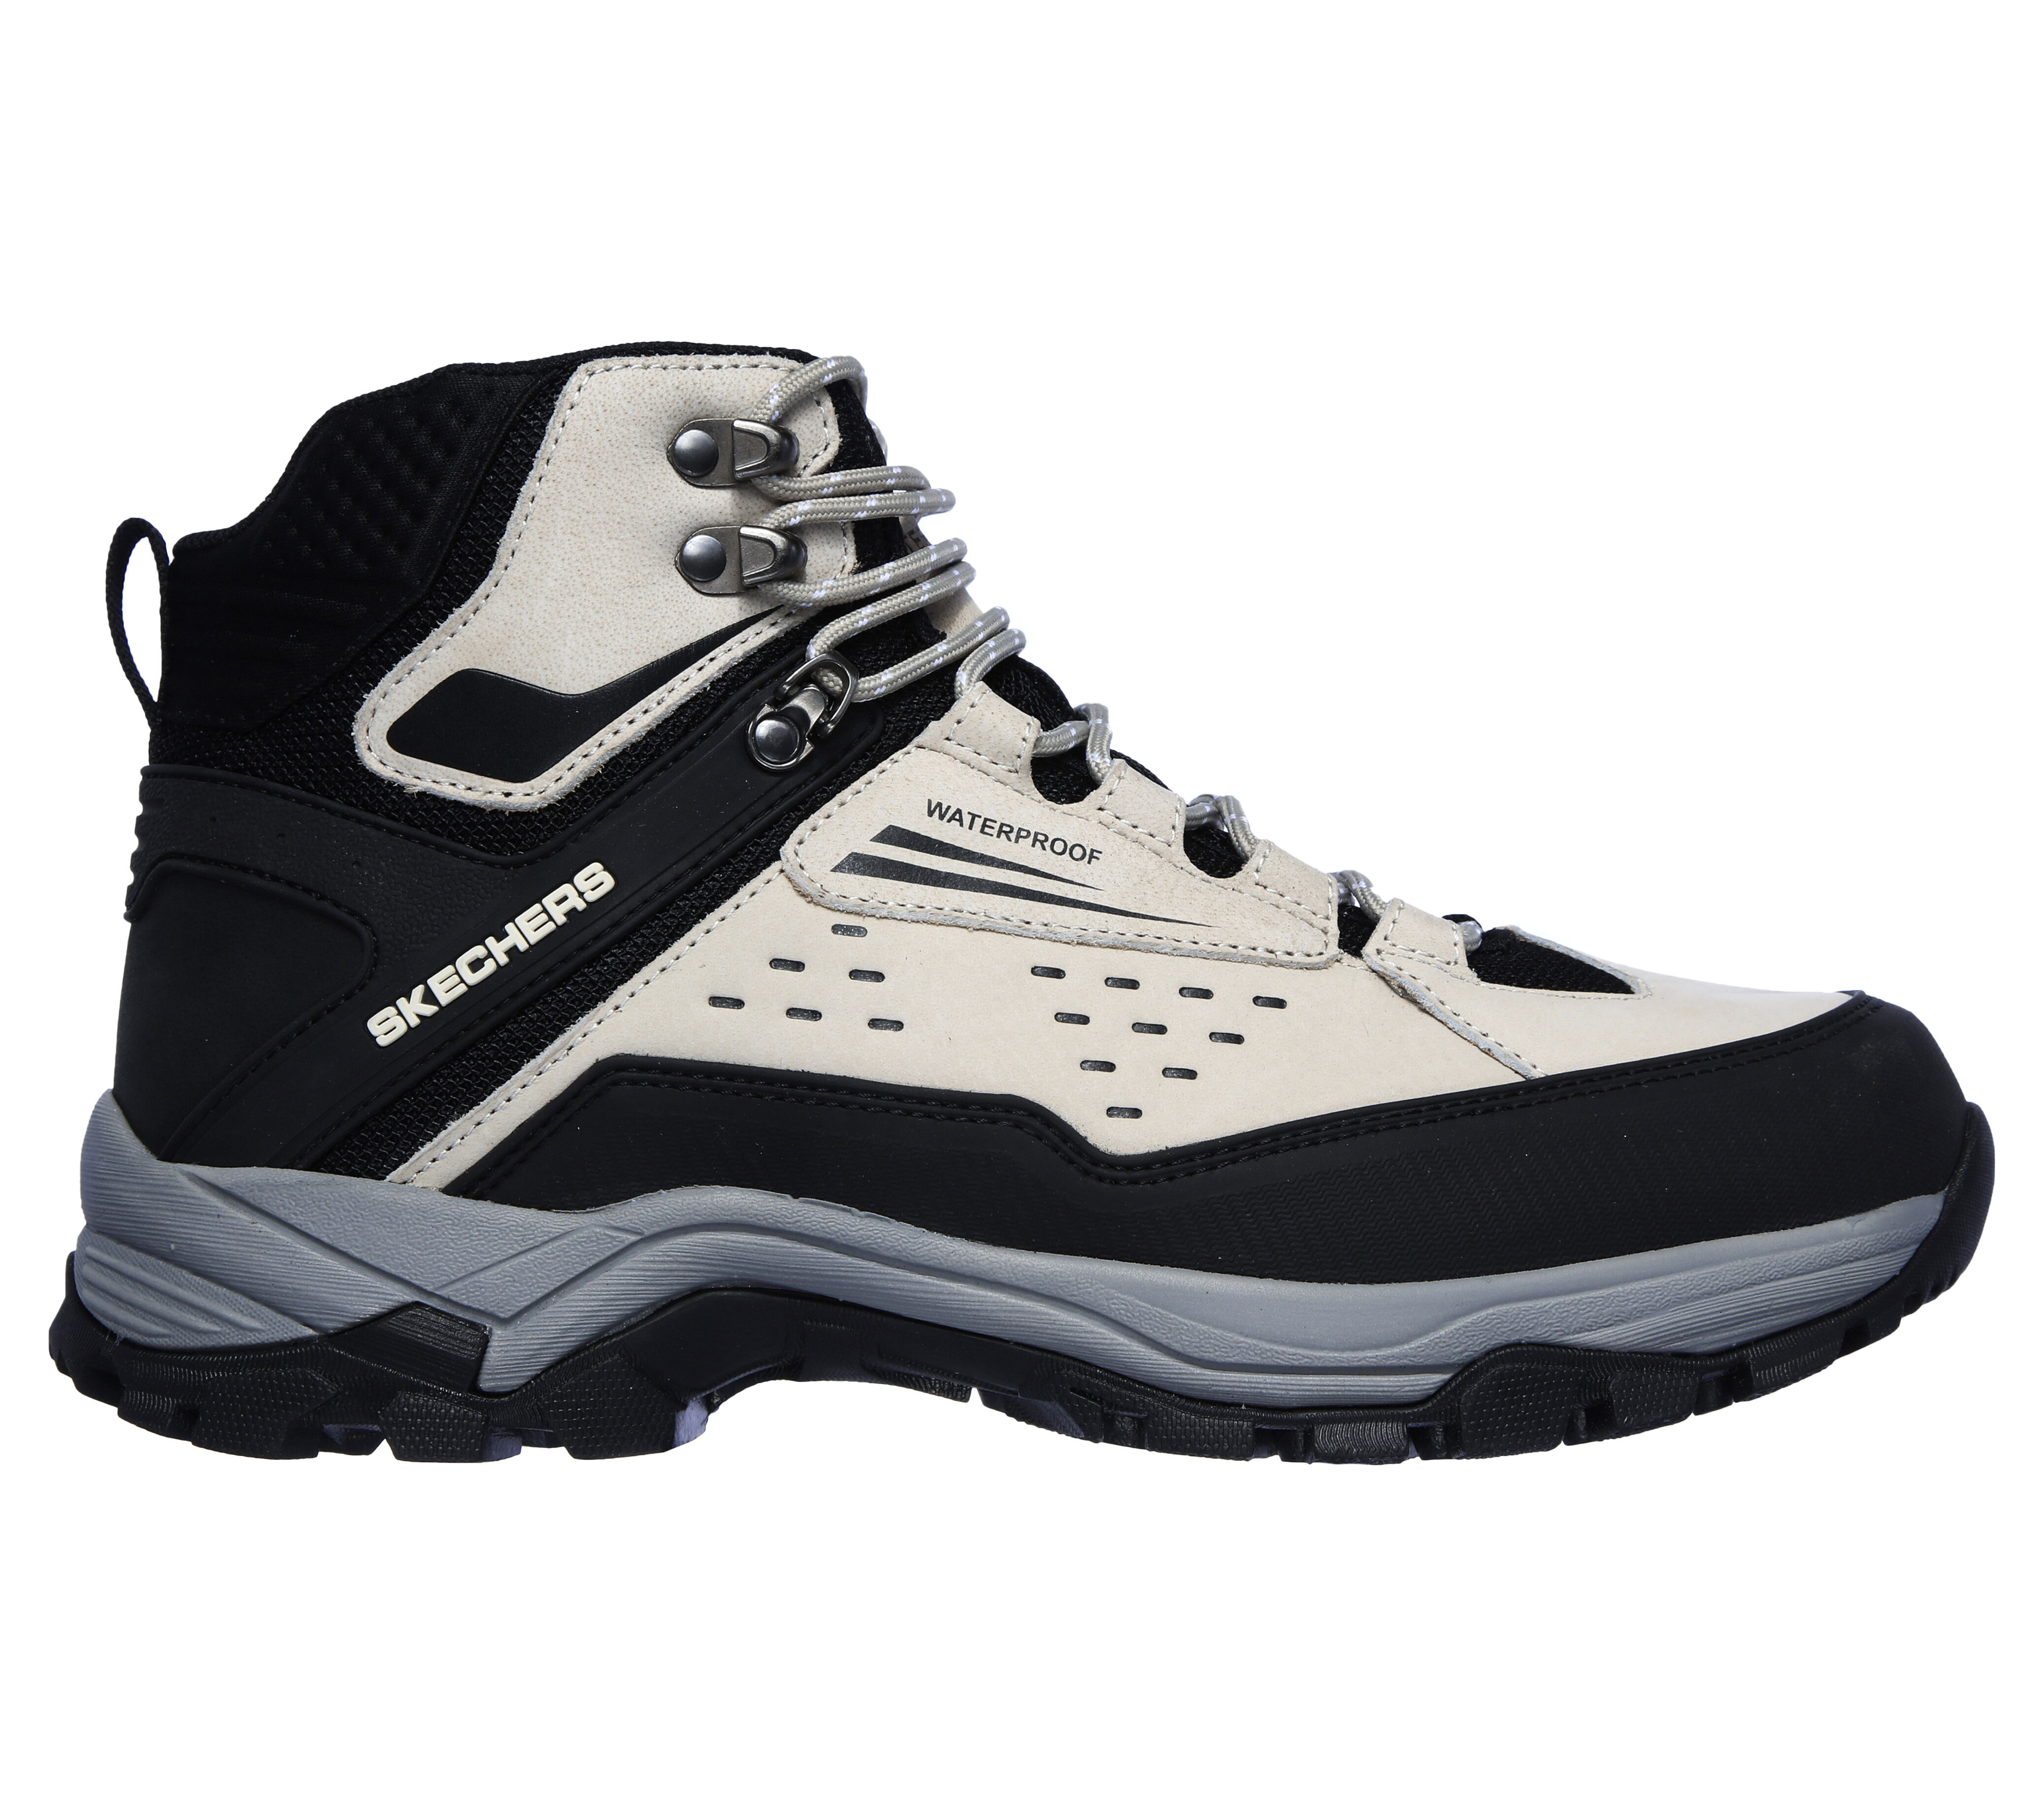 skechers relaxed fit memory foam mens boots